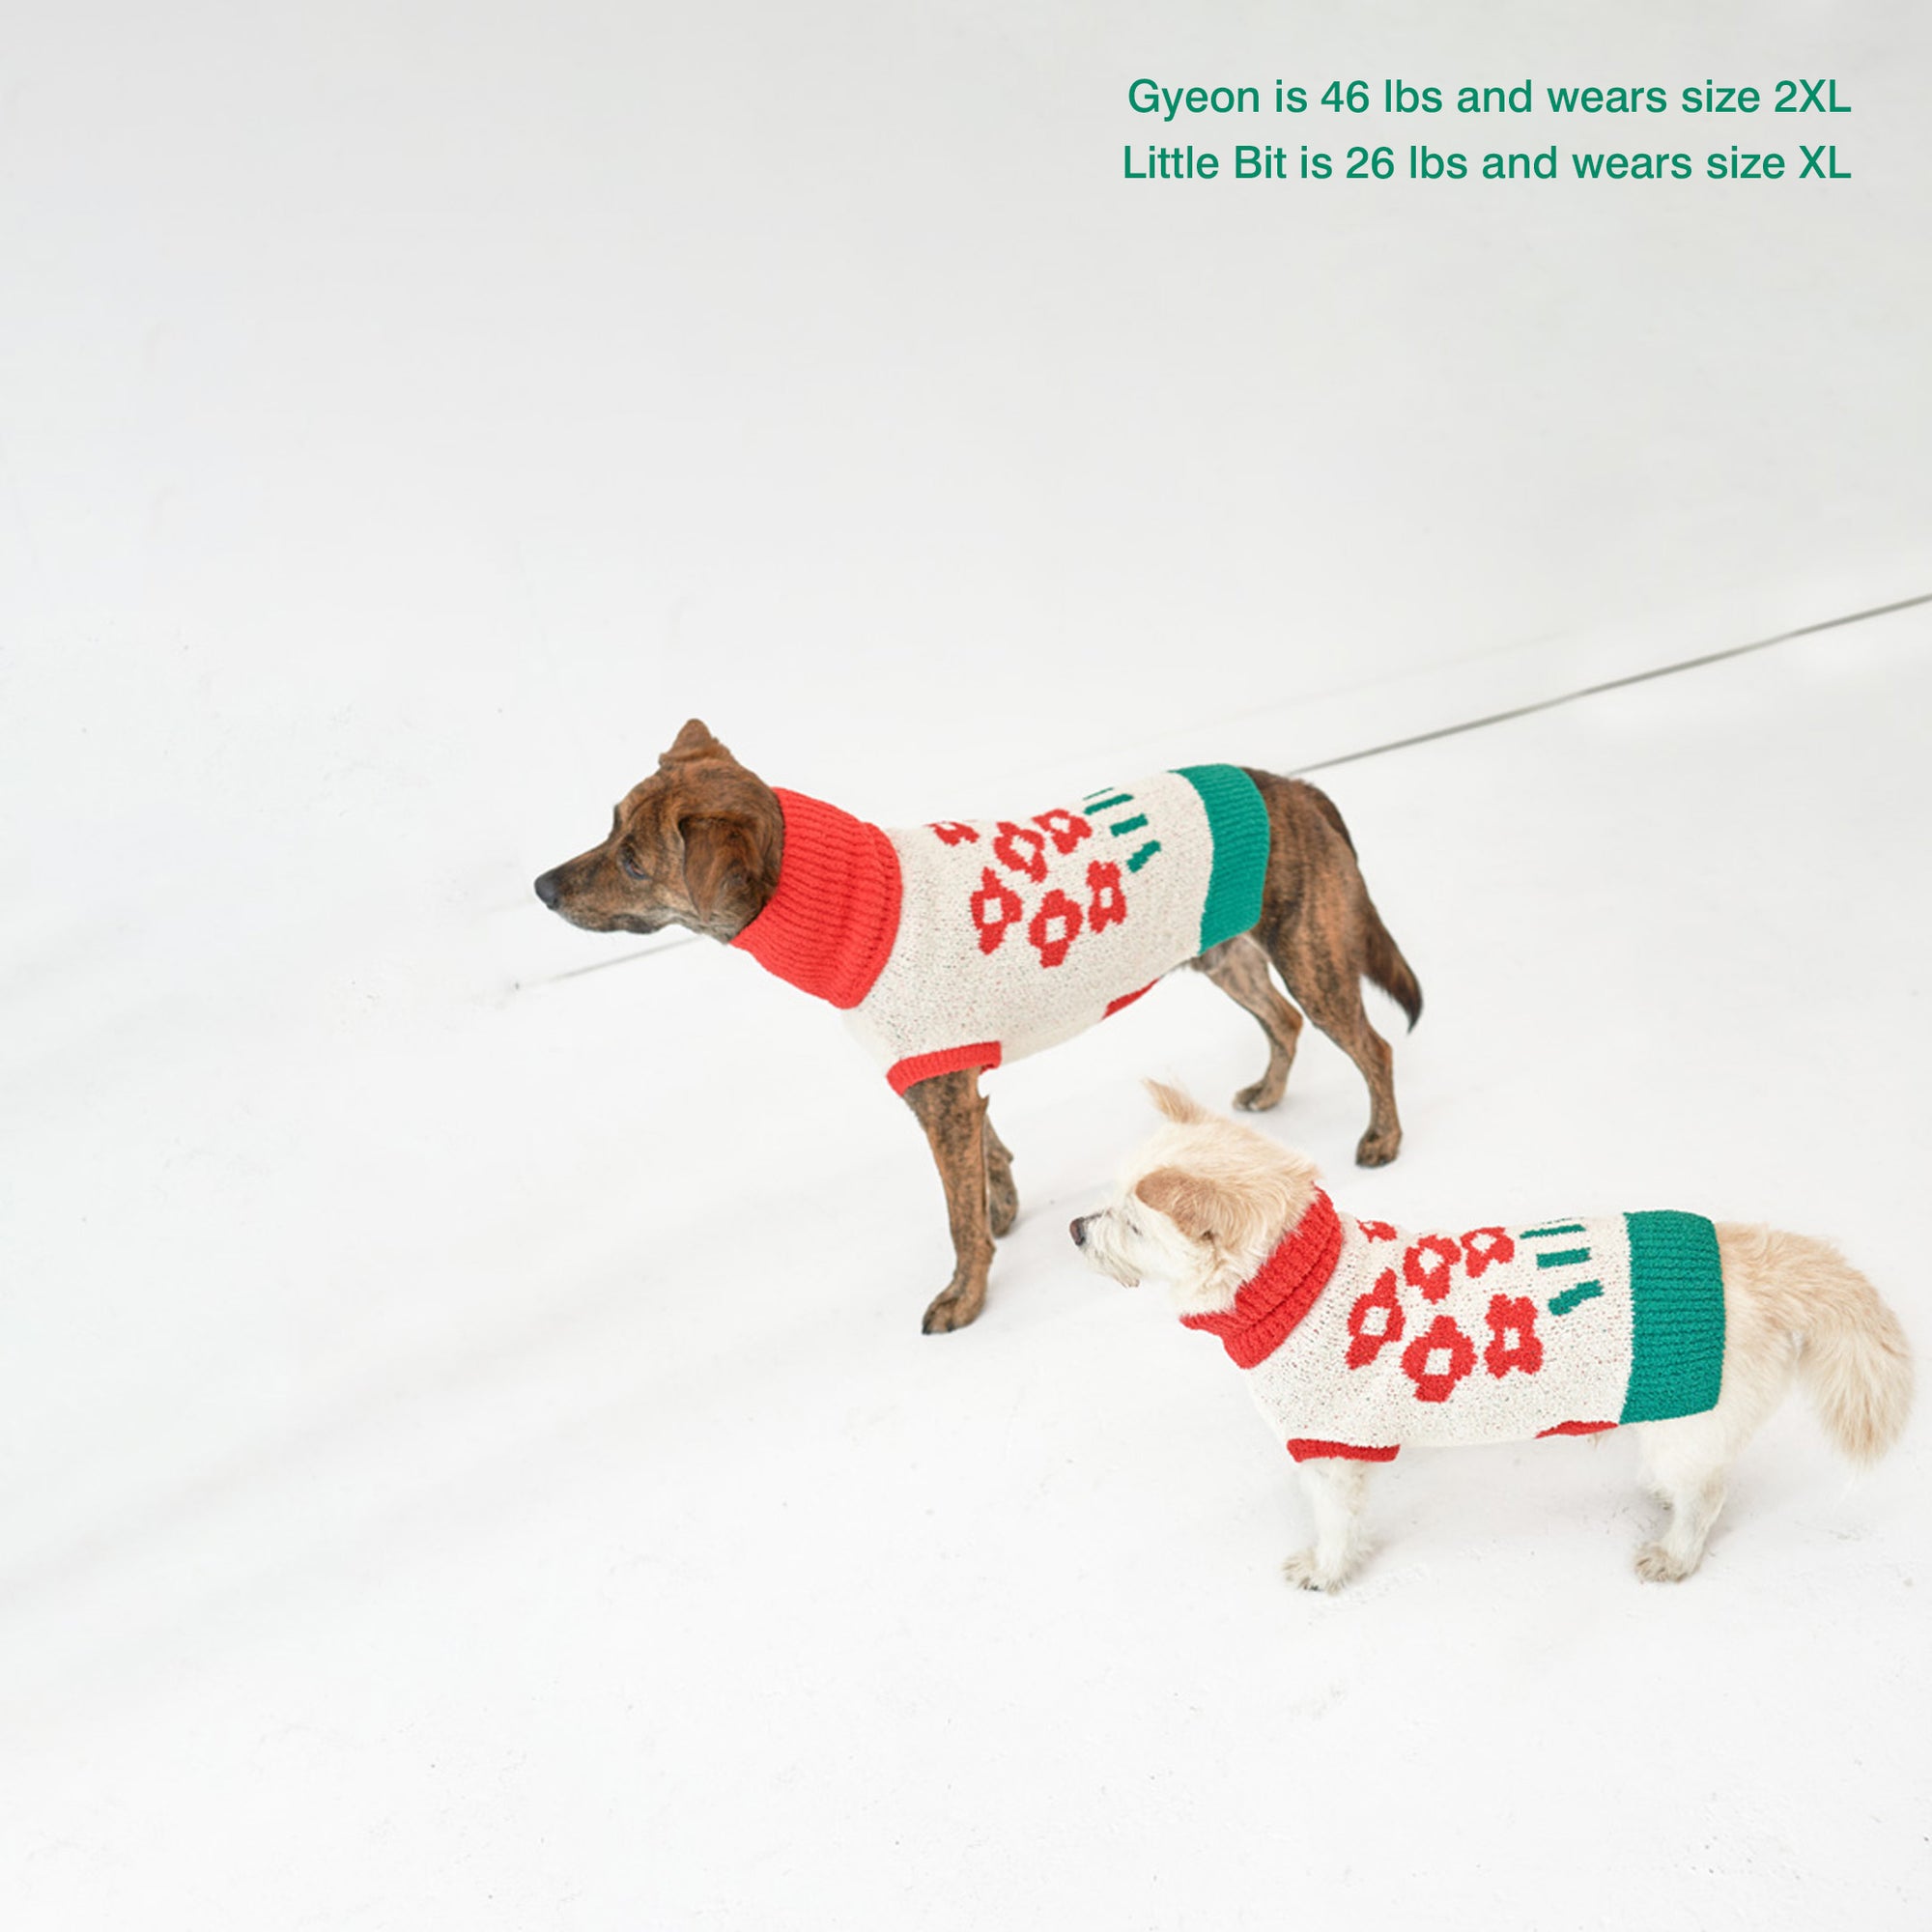 Dogs Gyeon and Little Bit, in "The Furryfolks" flower sweaters size 2XL and XL, stand in a white space.